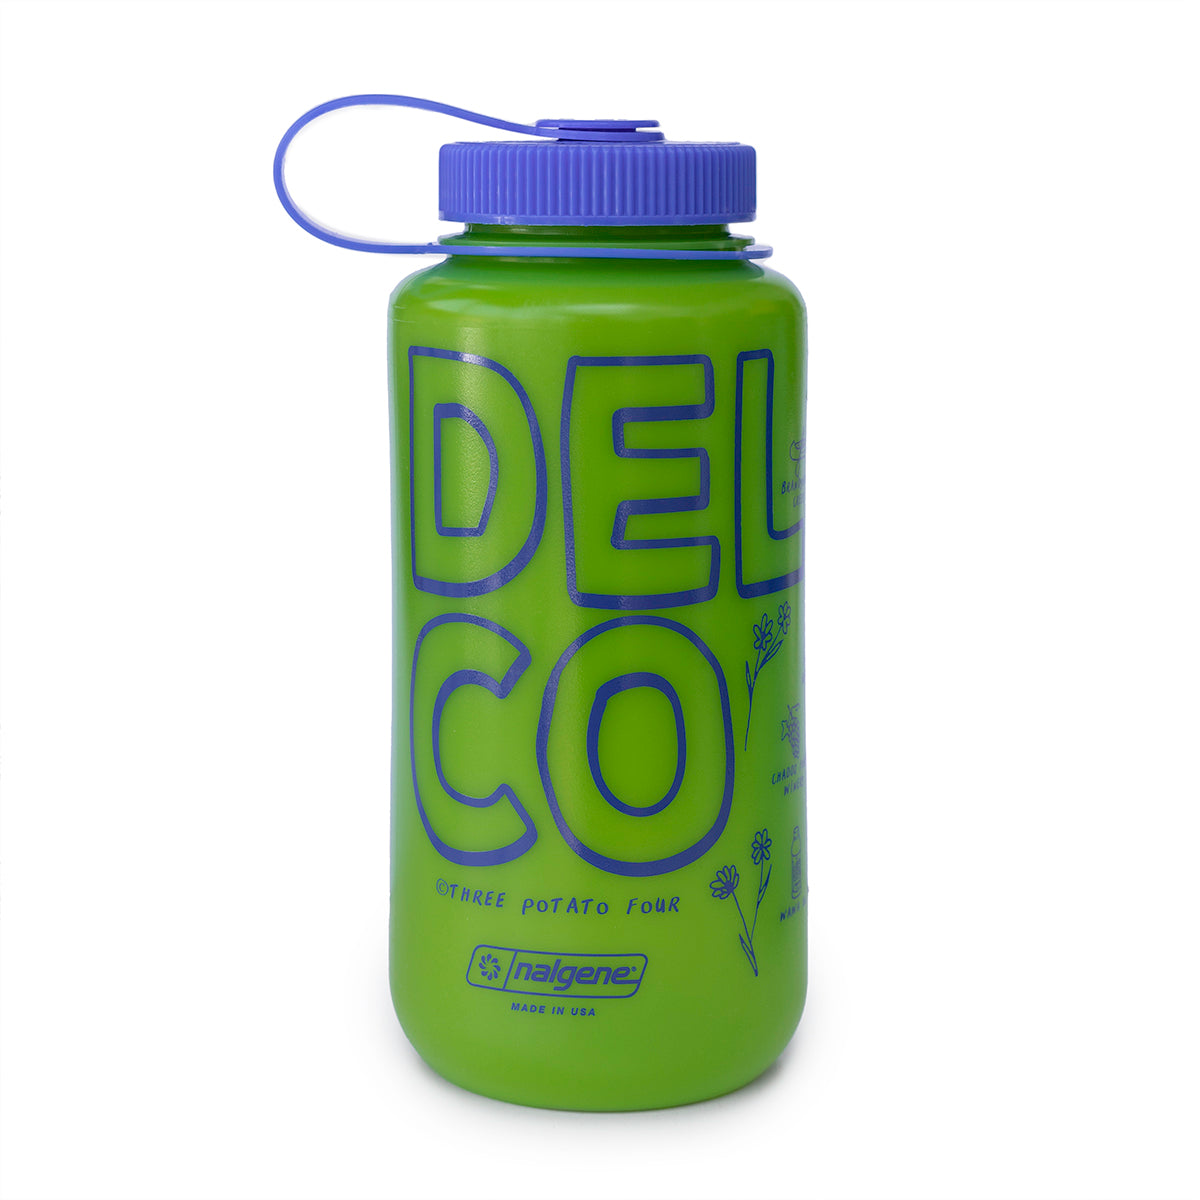 Manna Dual Lid Bottle - Green, 1 gal - Dillons Food Stores